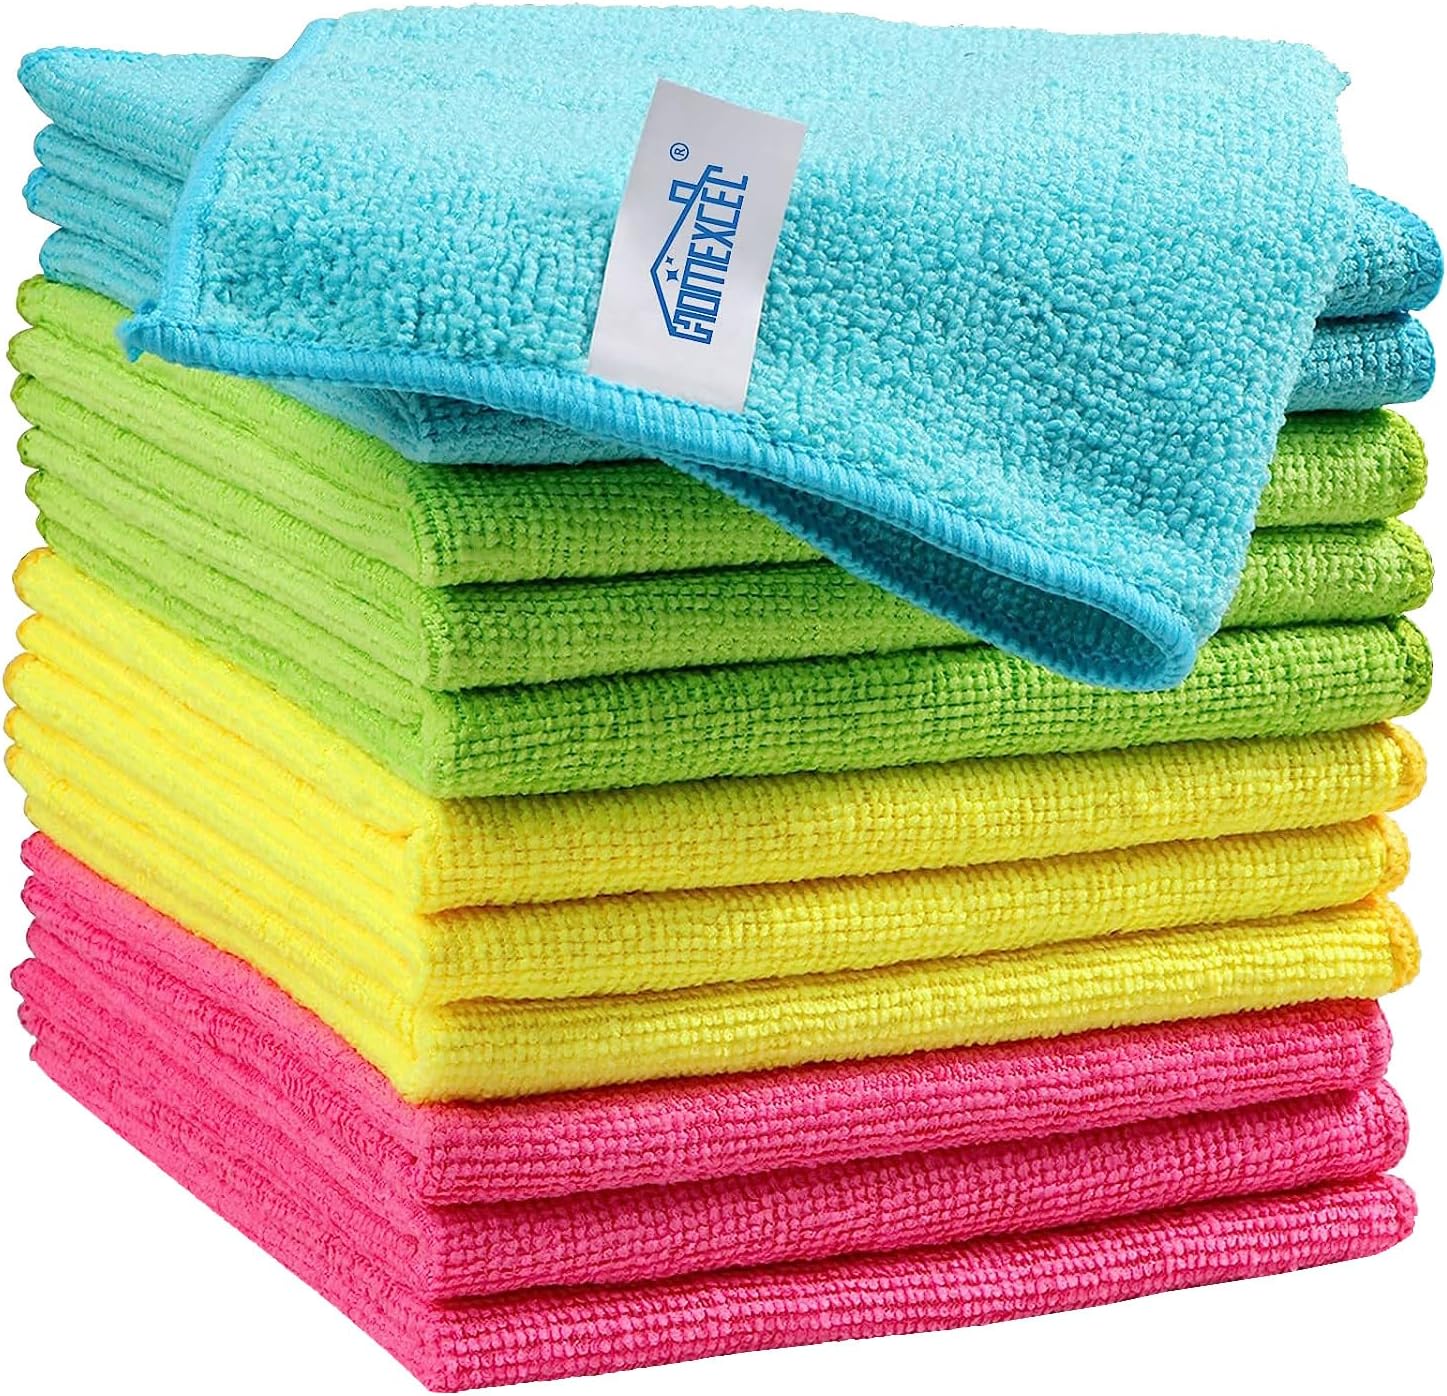 HOMEXCEL Microfiber Cleaning Cloth,12 Pack Cleaning Rag